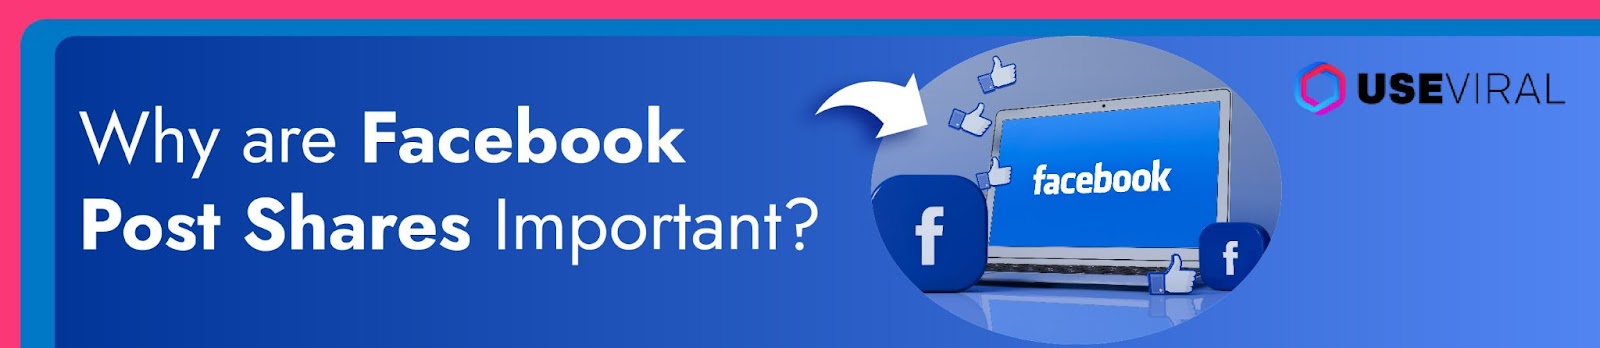 Why are Facebook Post Shares Important?